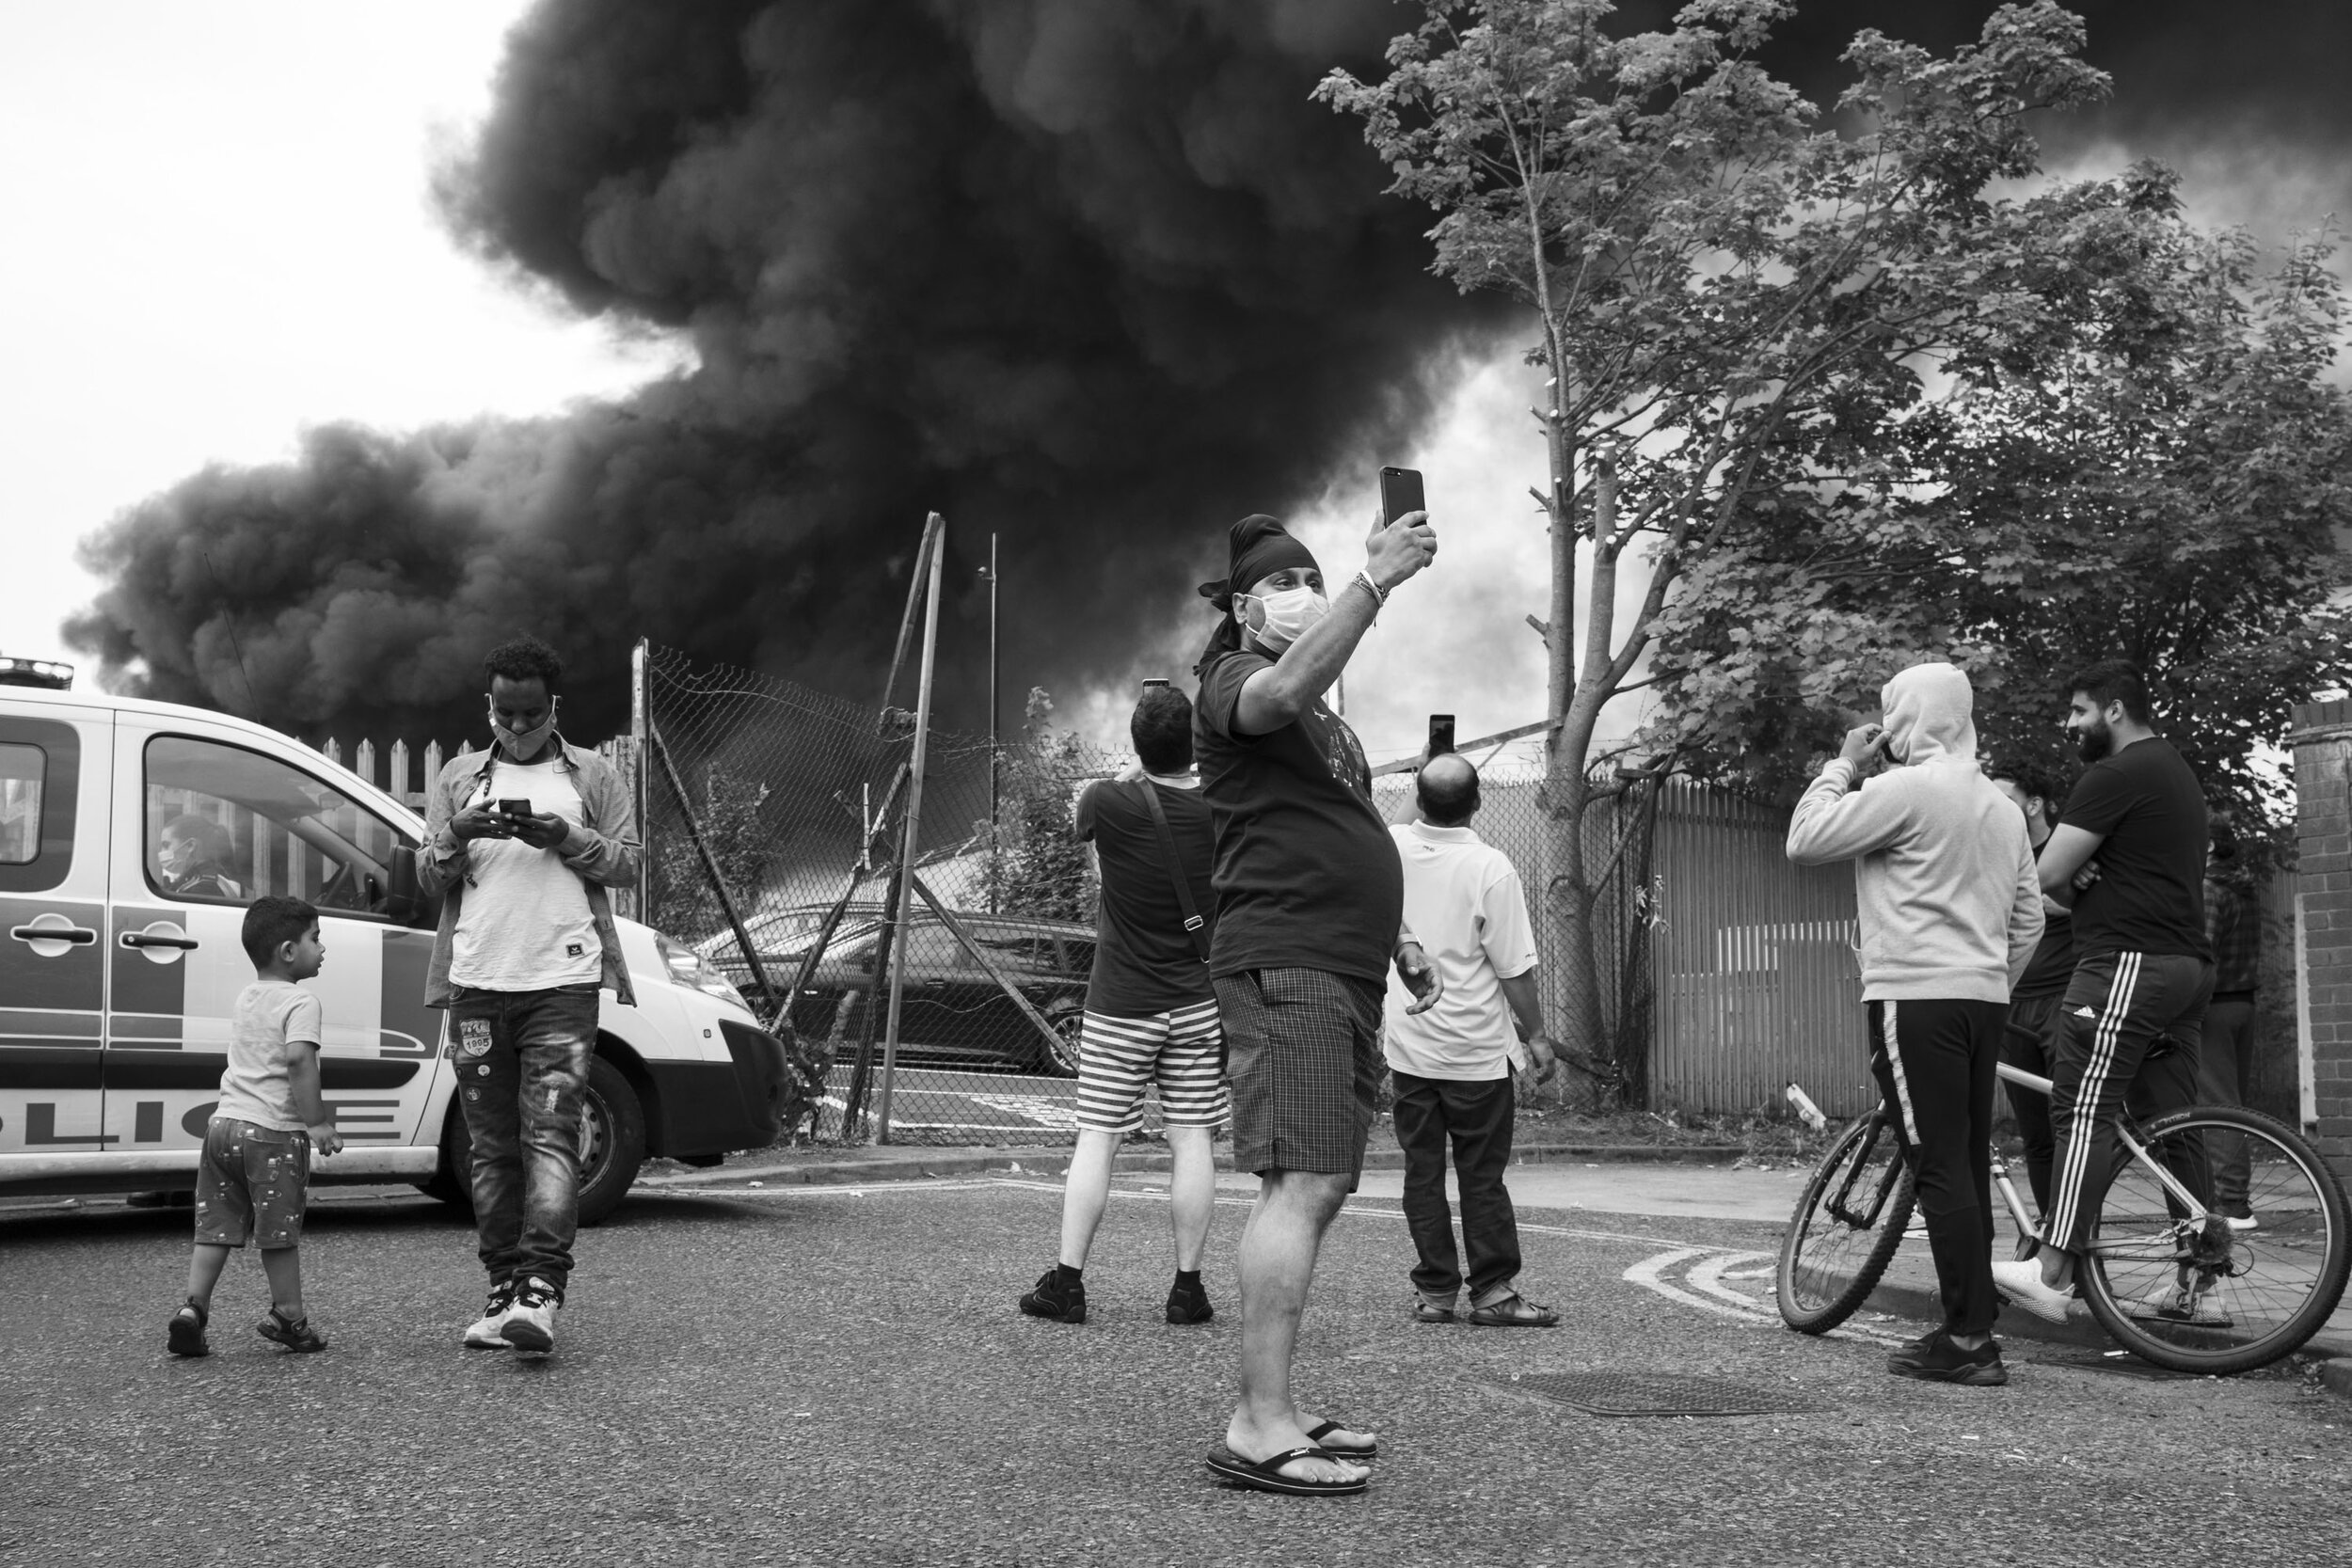  Local people gather to witness a large scale fire at a plastics factory at Tyseley Industrial Estate. August 2020. Tyseley. 